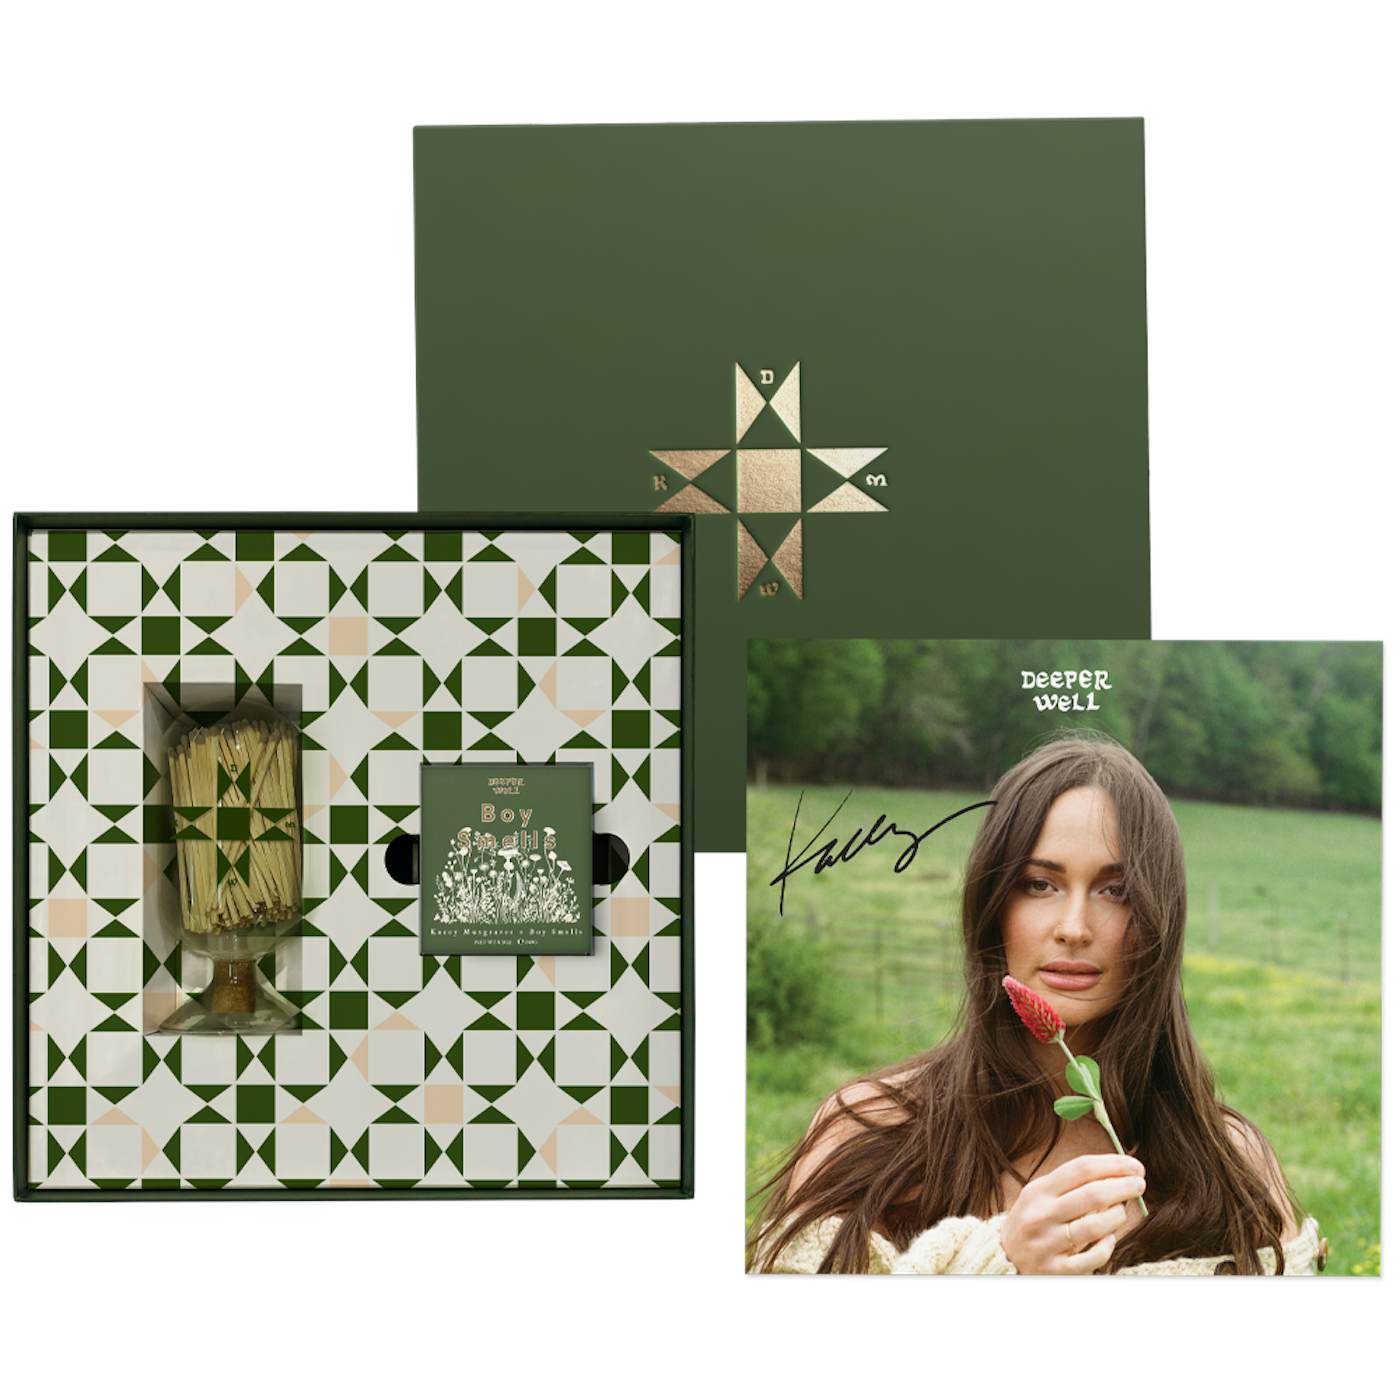 Deeper Well Vinyl (With Scented Sleeves) – Kacey Musgraves